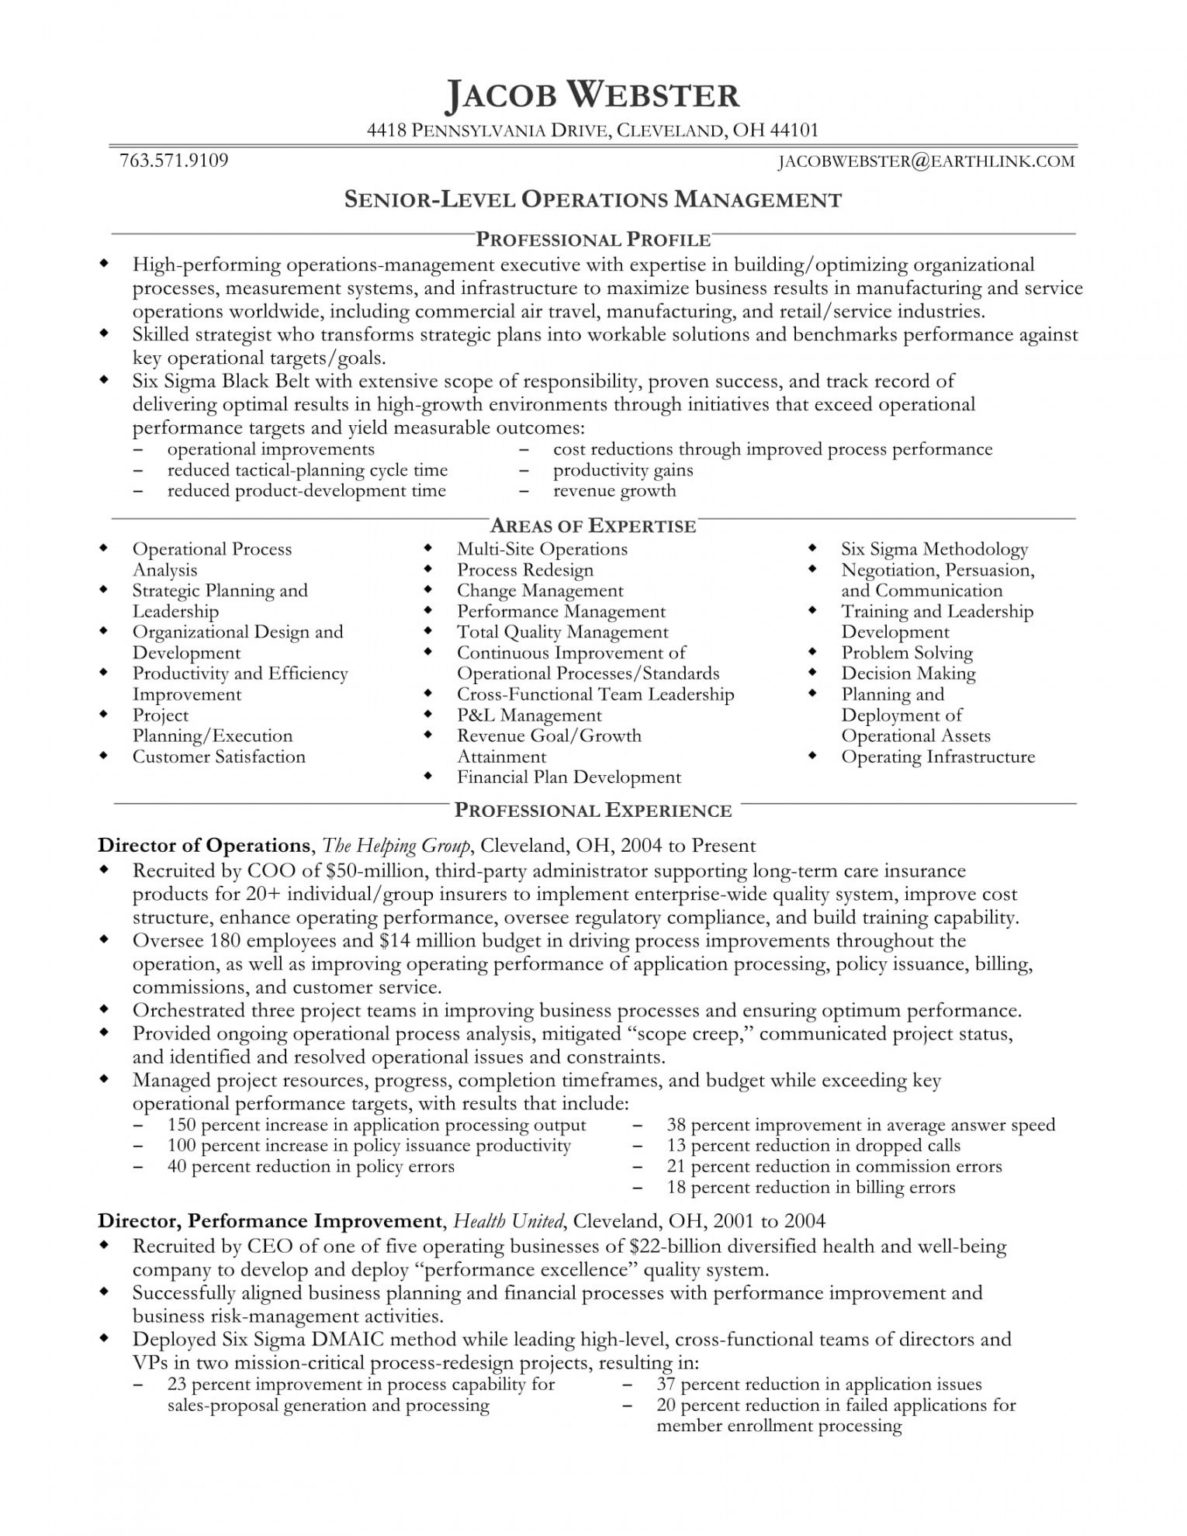 free resume templates for communciations professionals